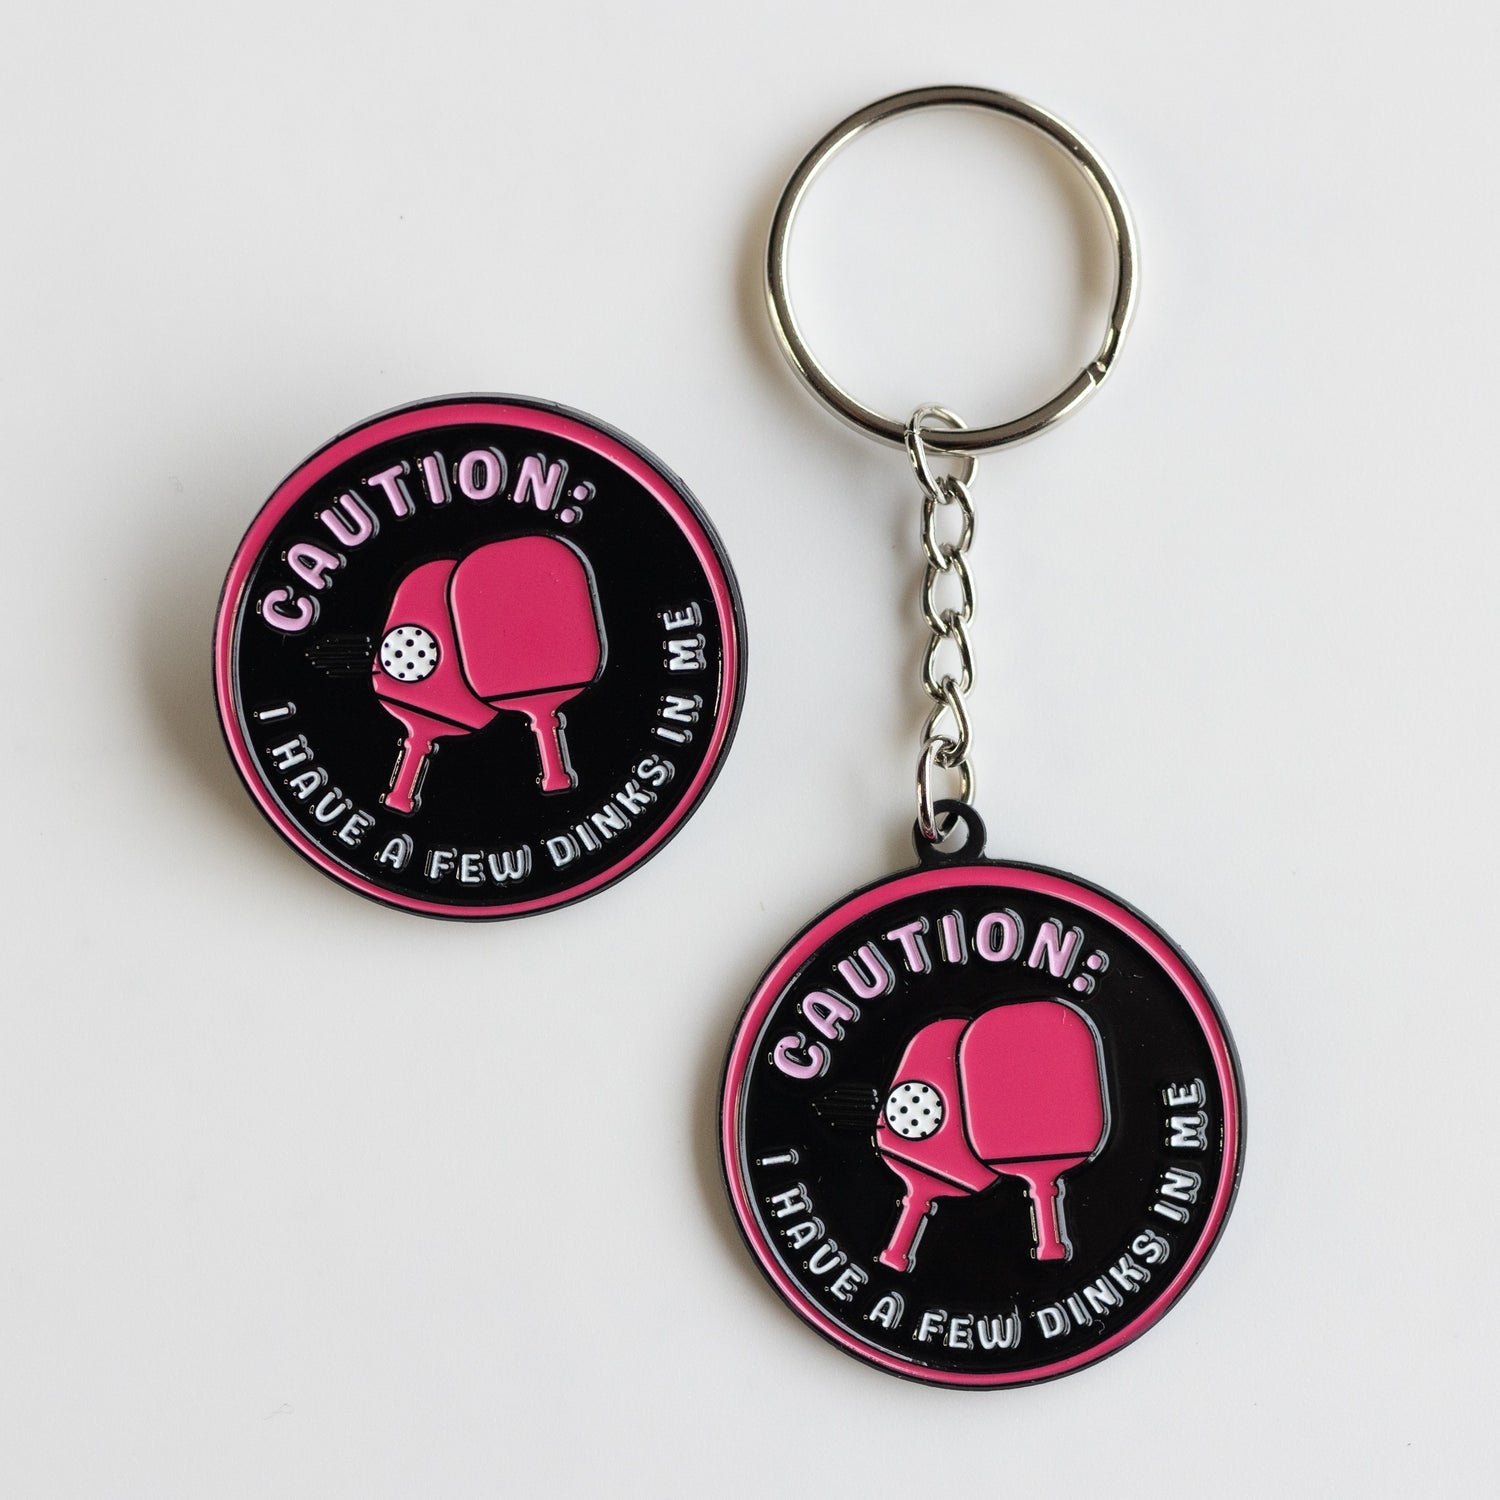 Funny Pickleball meme gitts. Pink and black enamel pin and keychain: Caution, I have a few dinks in me.